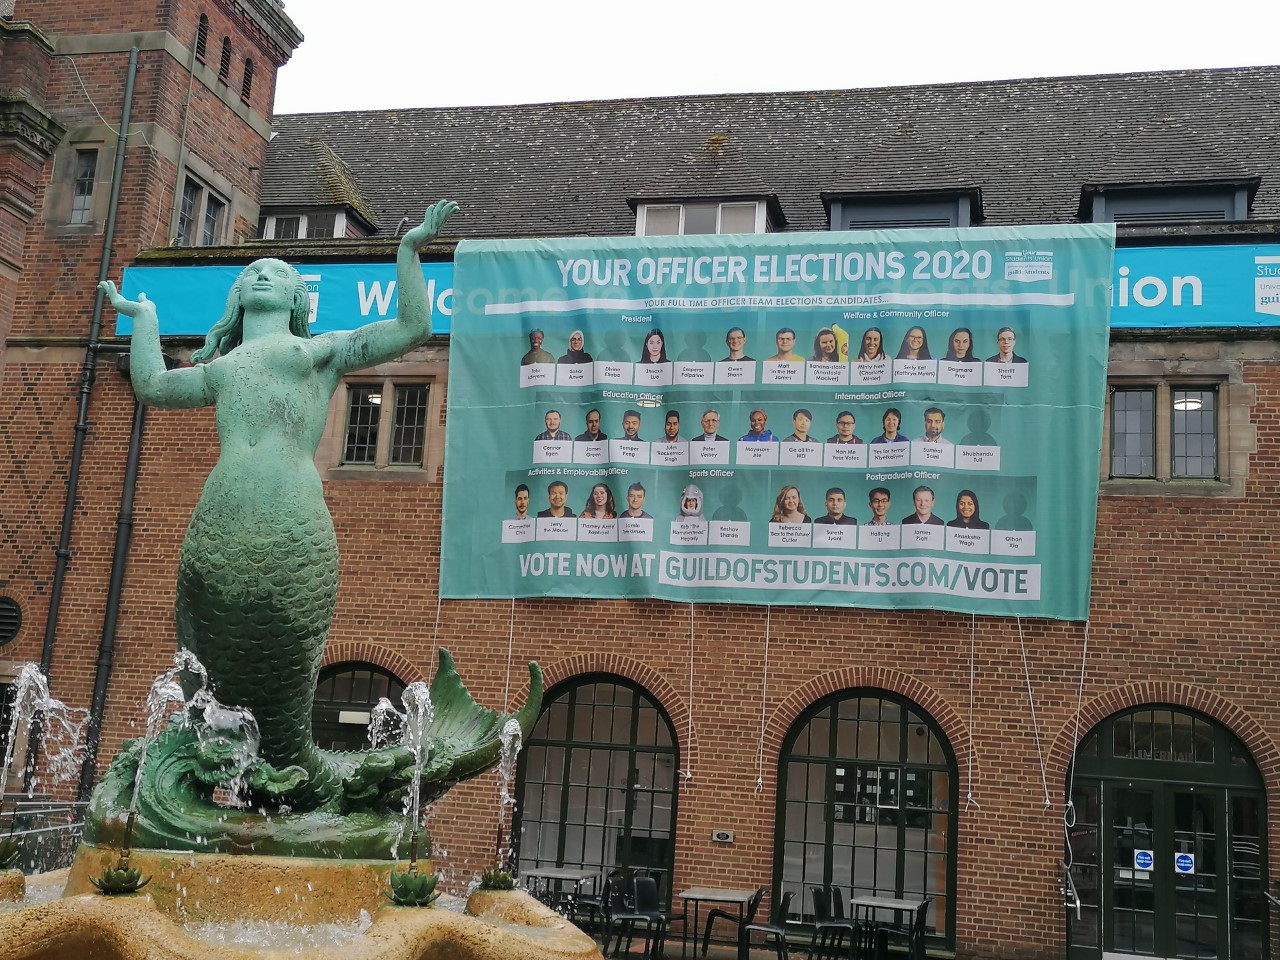 A banner showing the Guild Elections candidates behind the mermaid fountain at the Birmingham Guild of Students